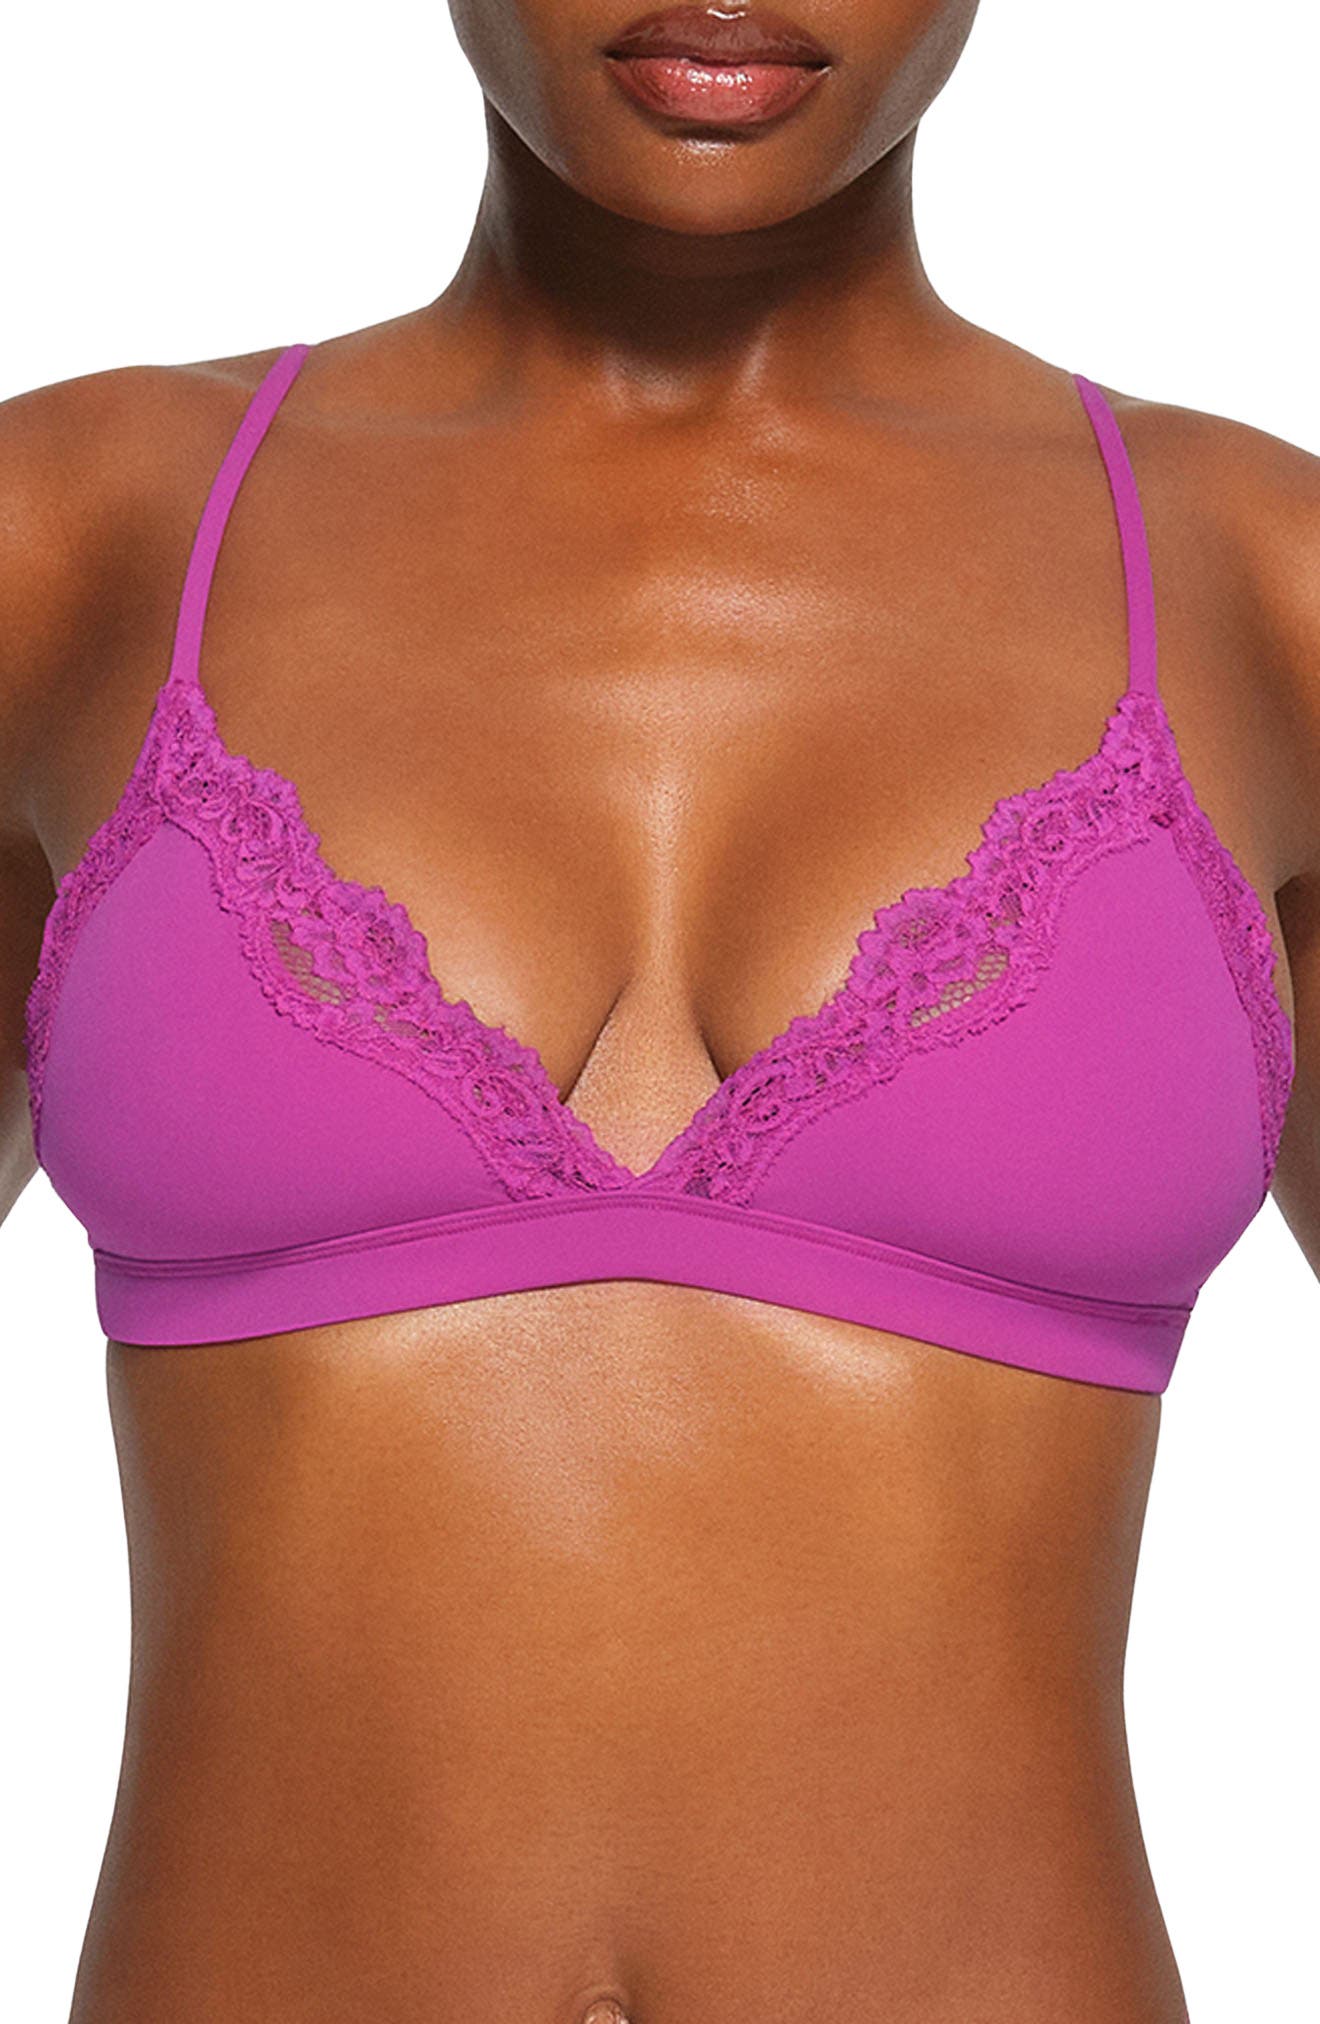 SKIMS Fits Everybody Lace Triangle Bralette in Cocoa